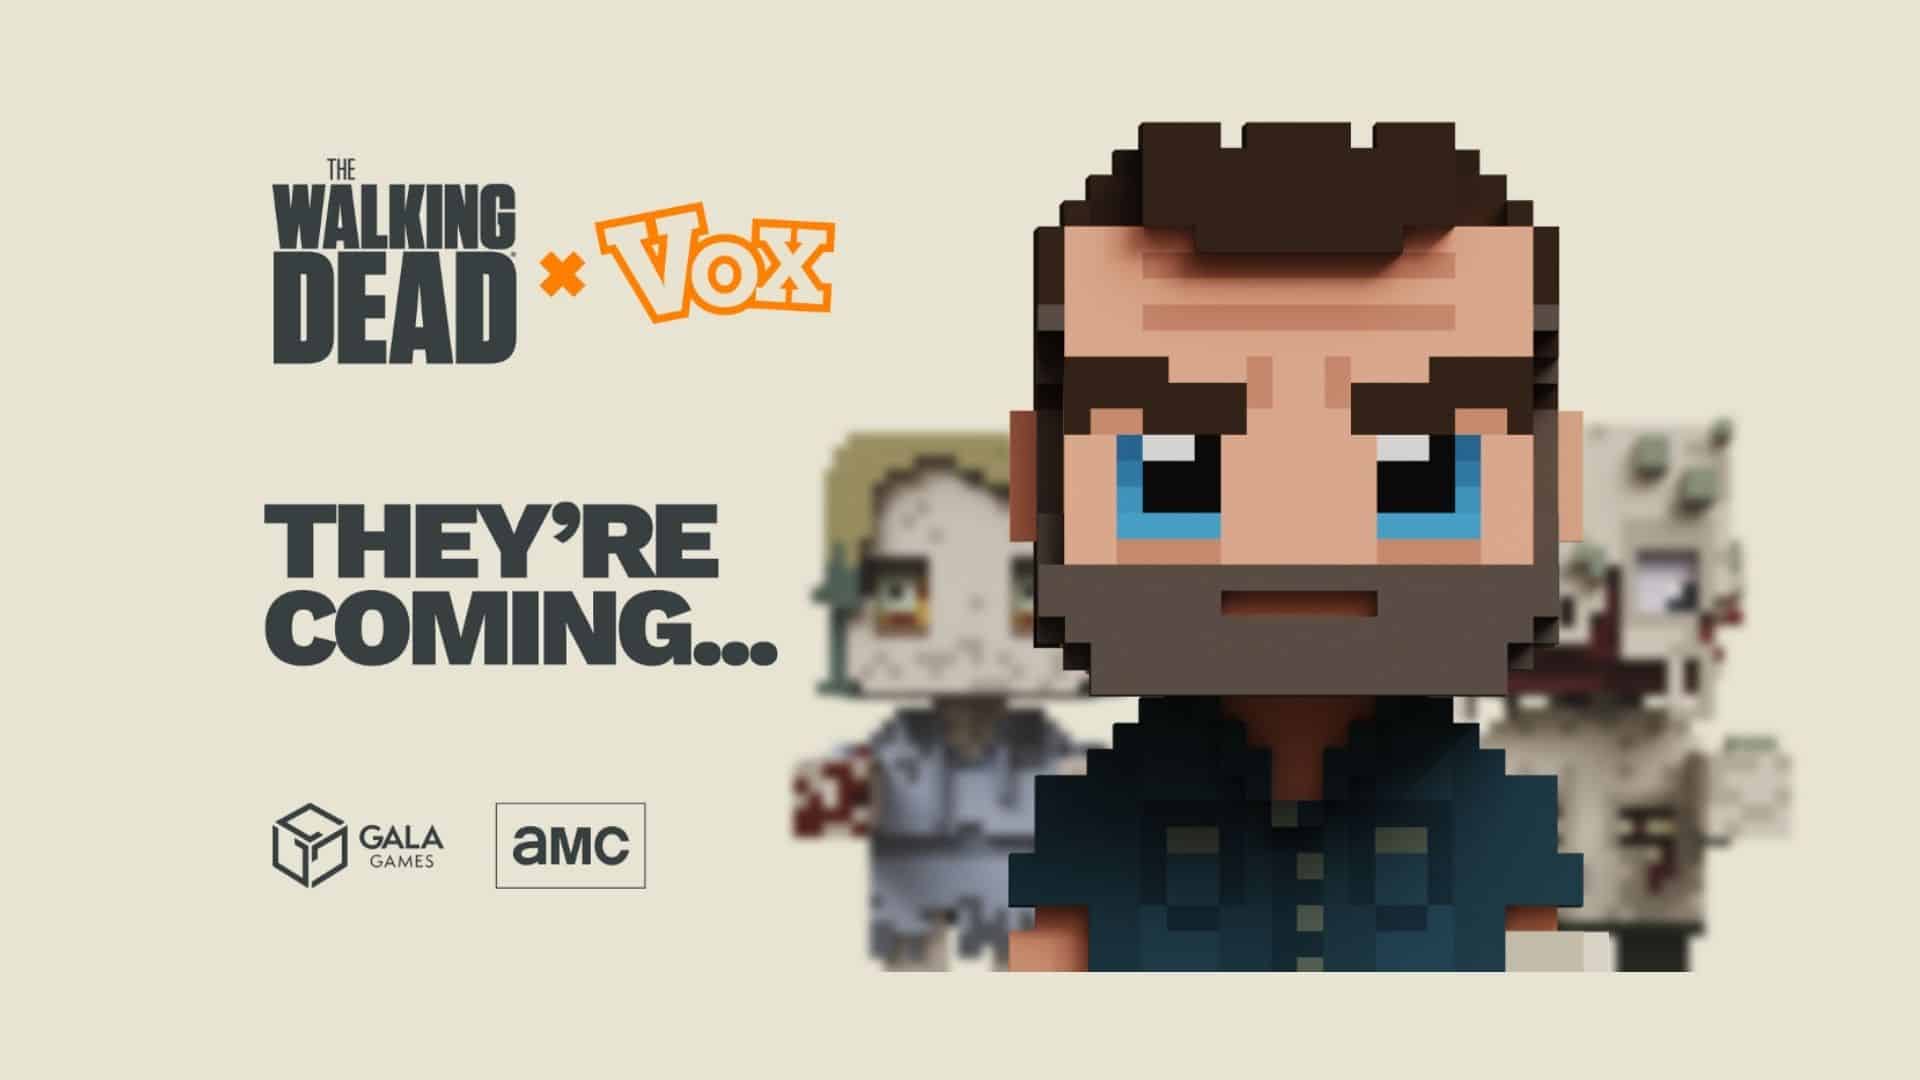 The New Walking Dead Edition VOX 